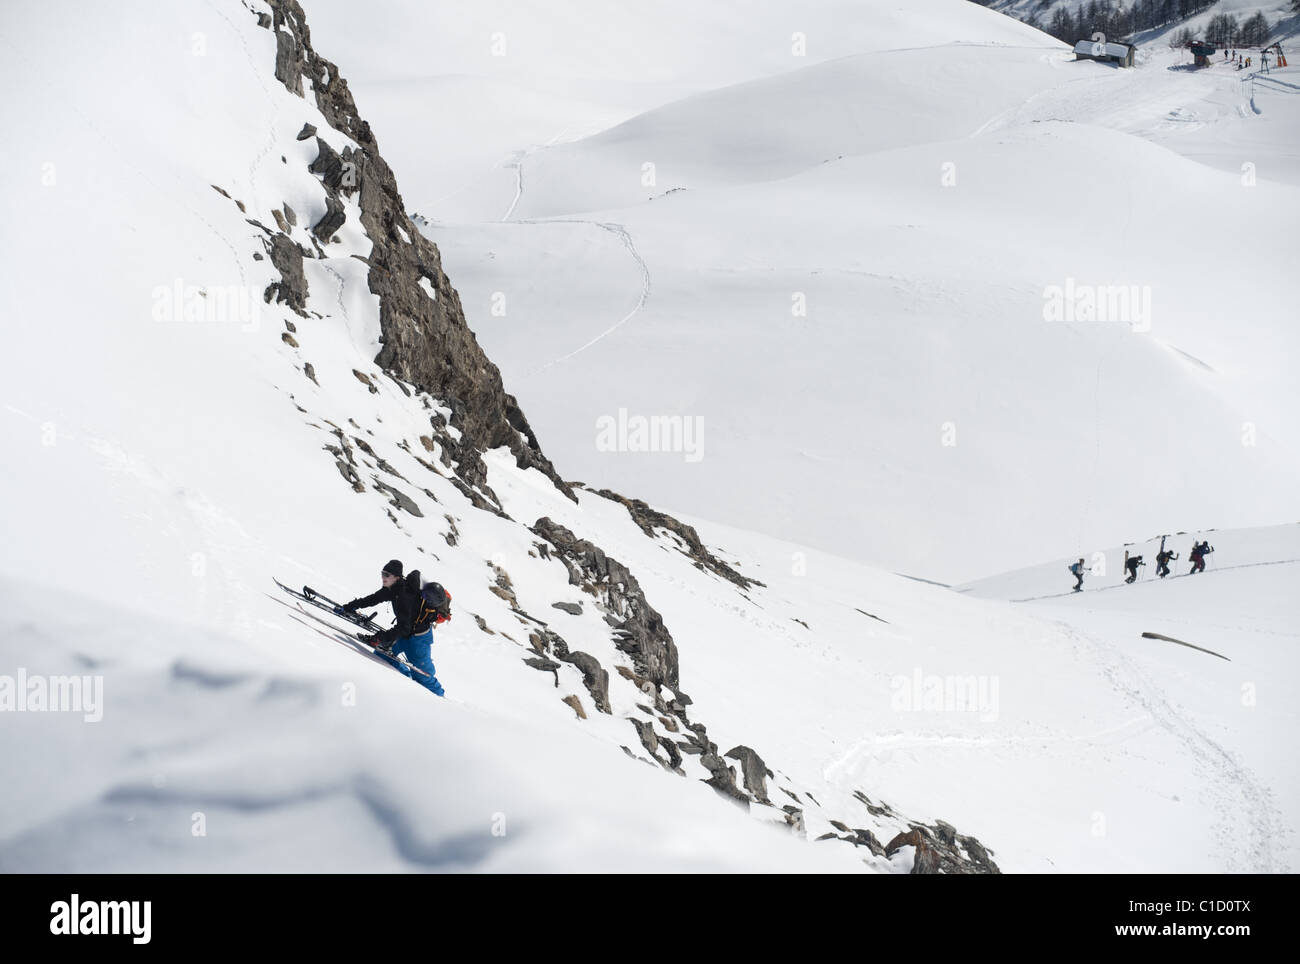 A free skier climbing up a snowy mountain side in Argentera, Italy Stock Photo